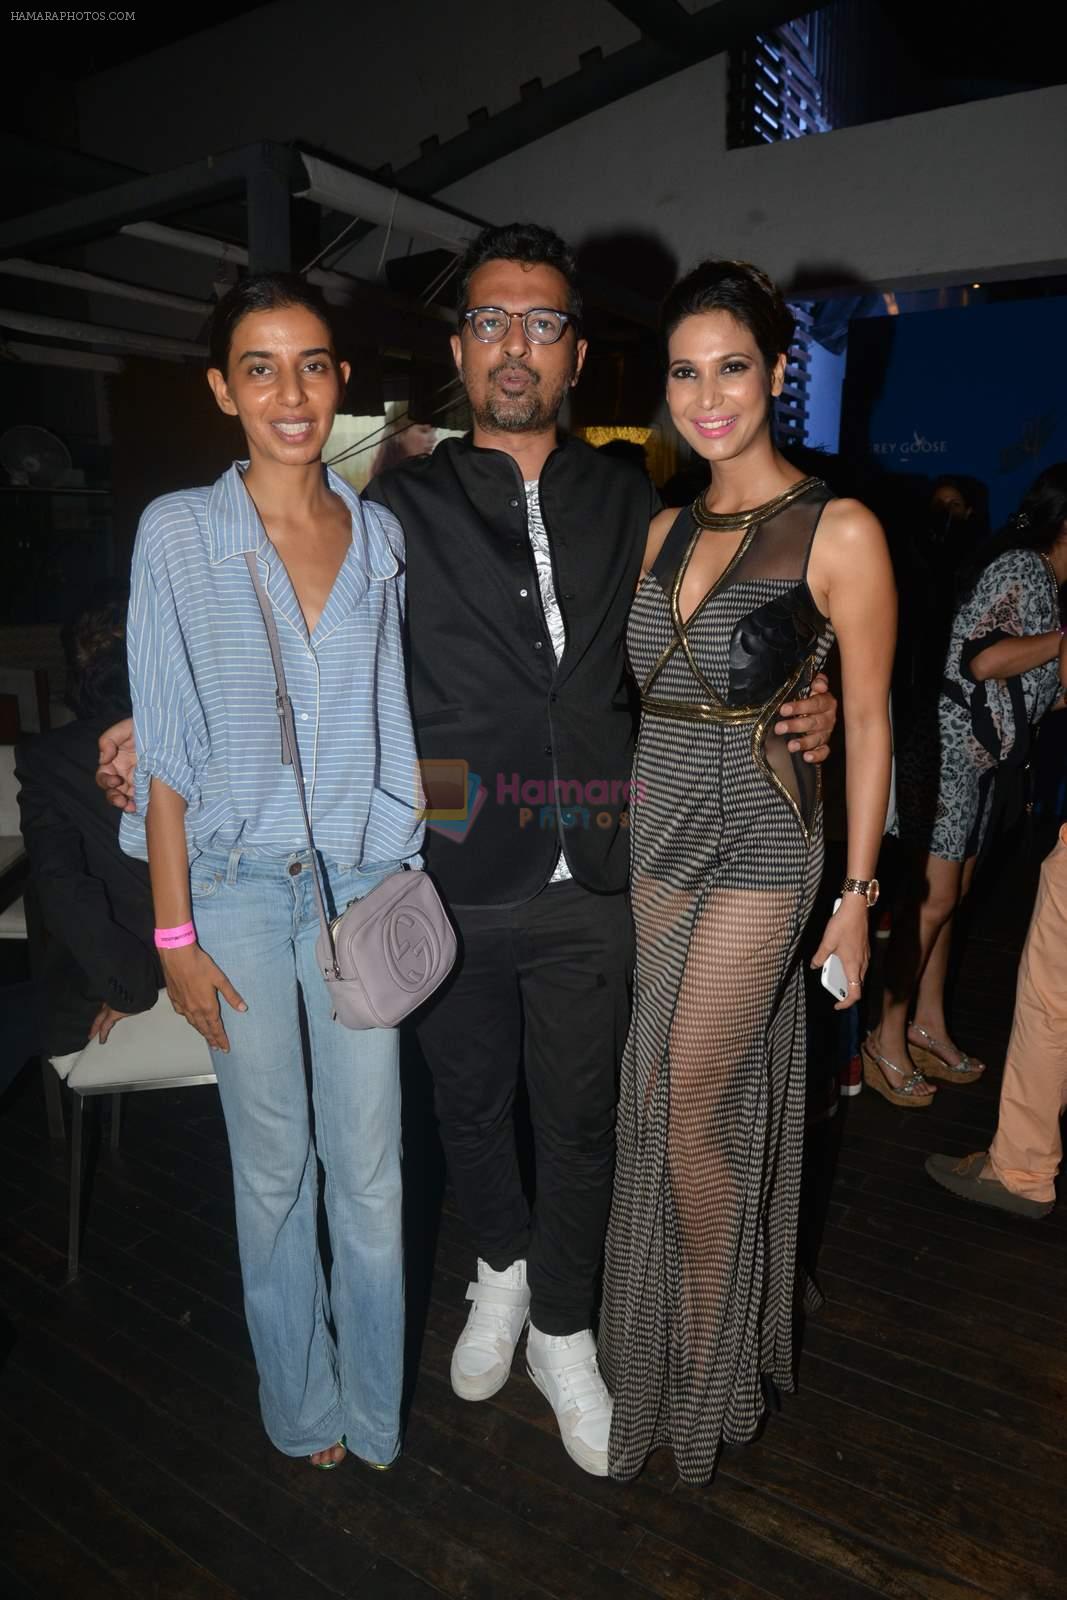 Prachi Mishra at Grey Goose Cabana Couture launch in Asilo on 8th May 2015